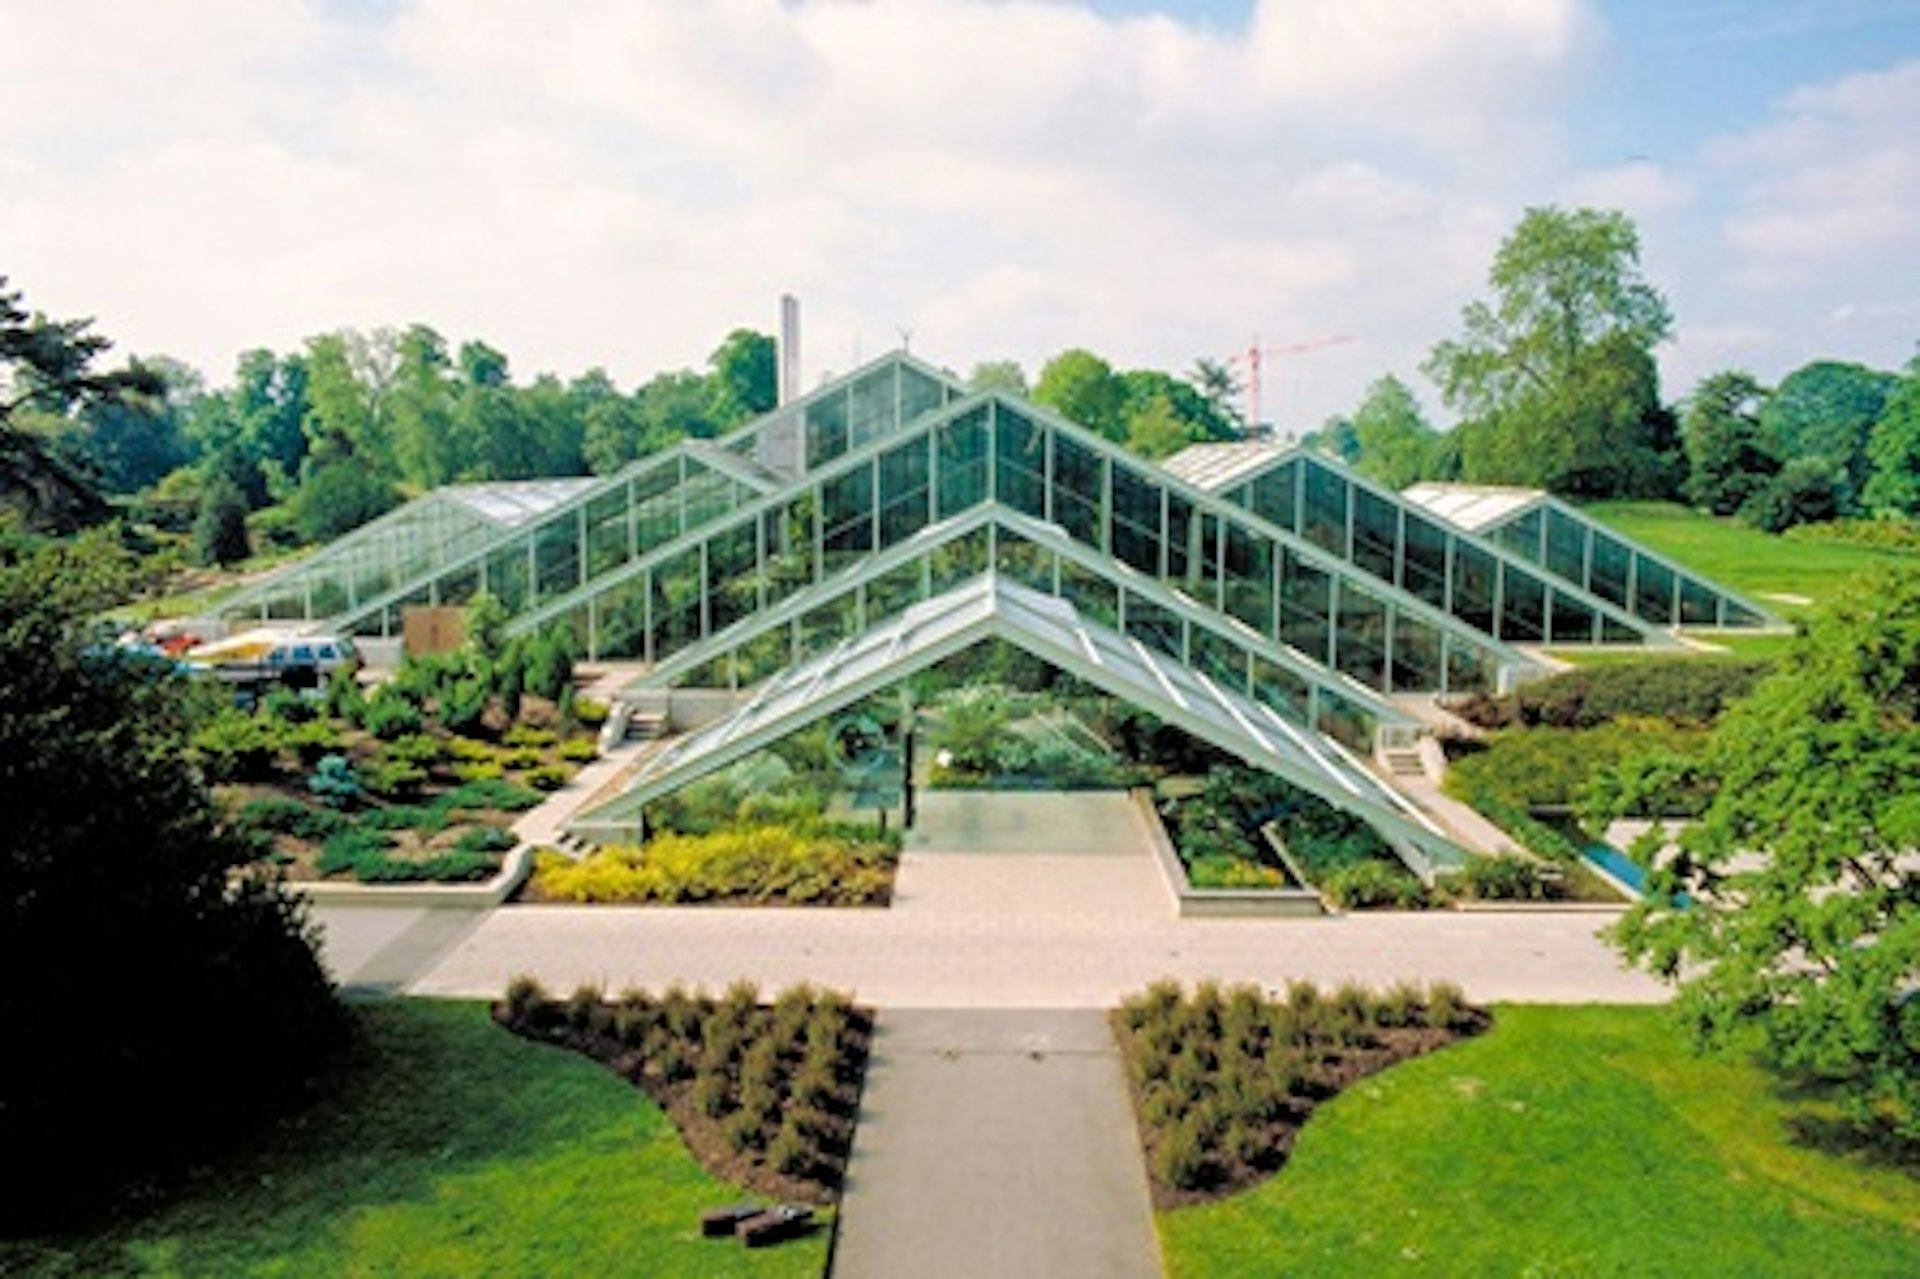 Family Visit to Kew Gardens for Two Adults and Two Children 3